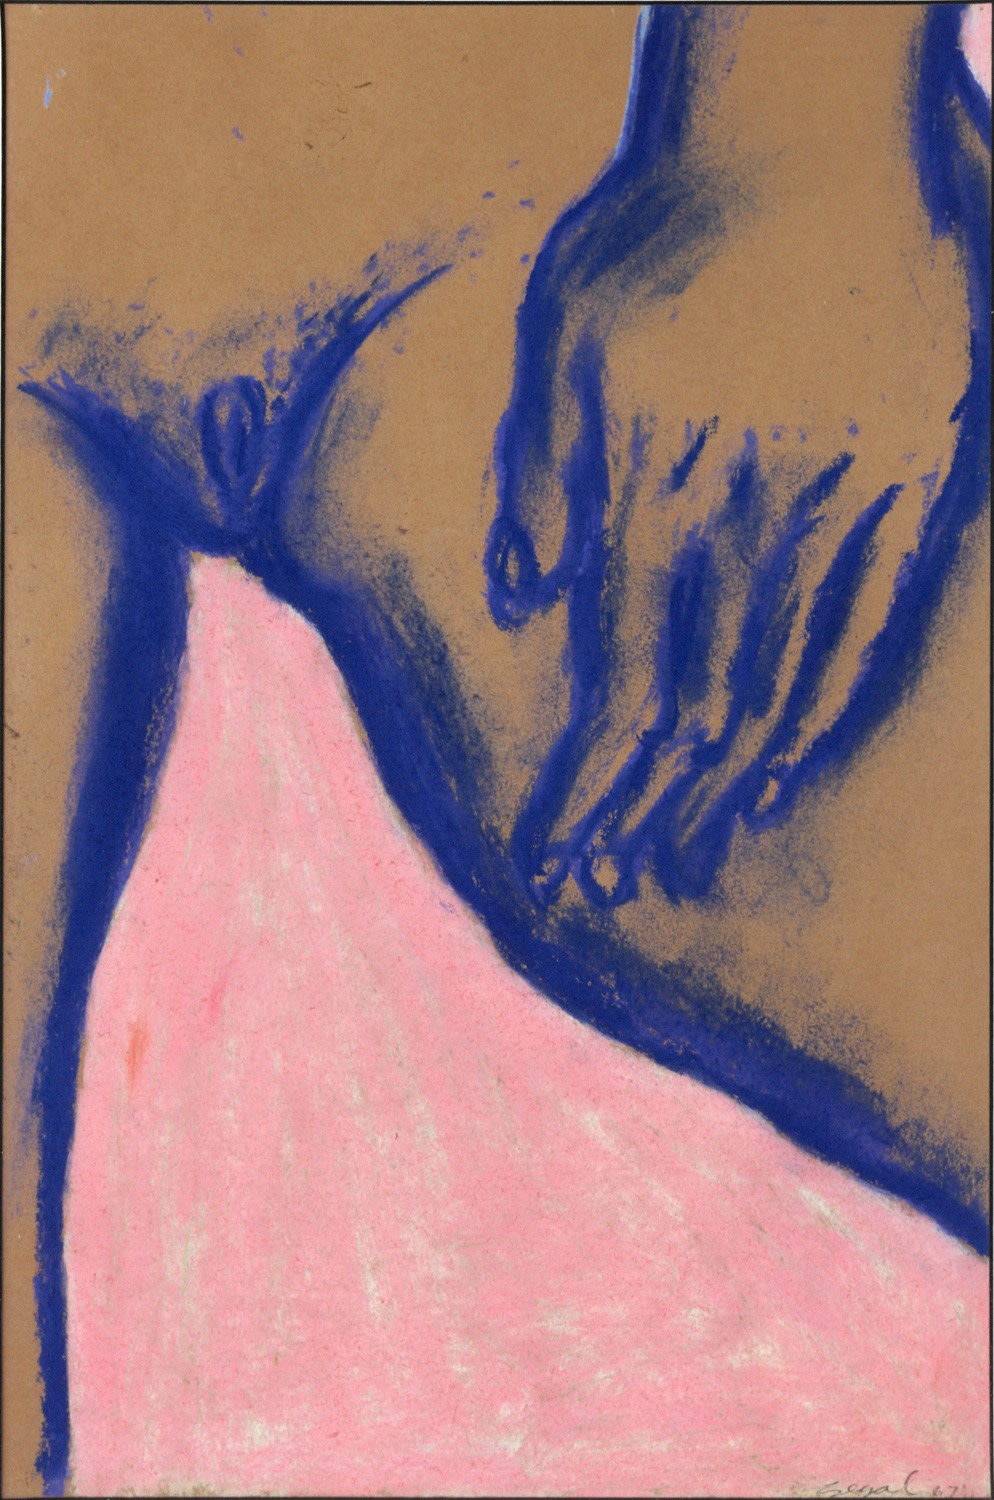 George Segal, Untitled (Hand on Thigh), 1964    Pastel on paper 18 x 12 inches